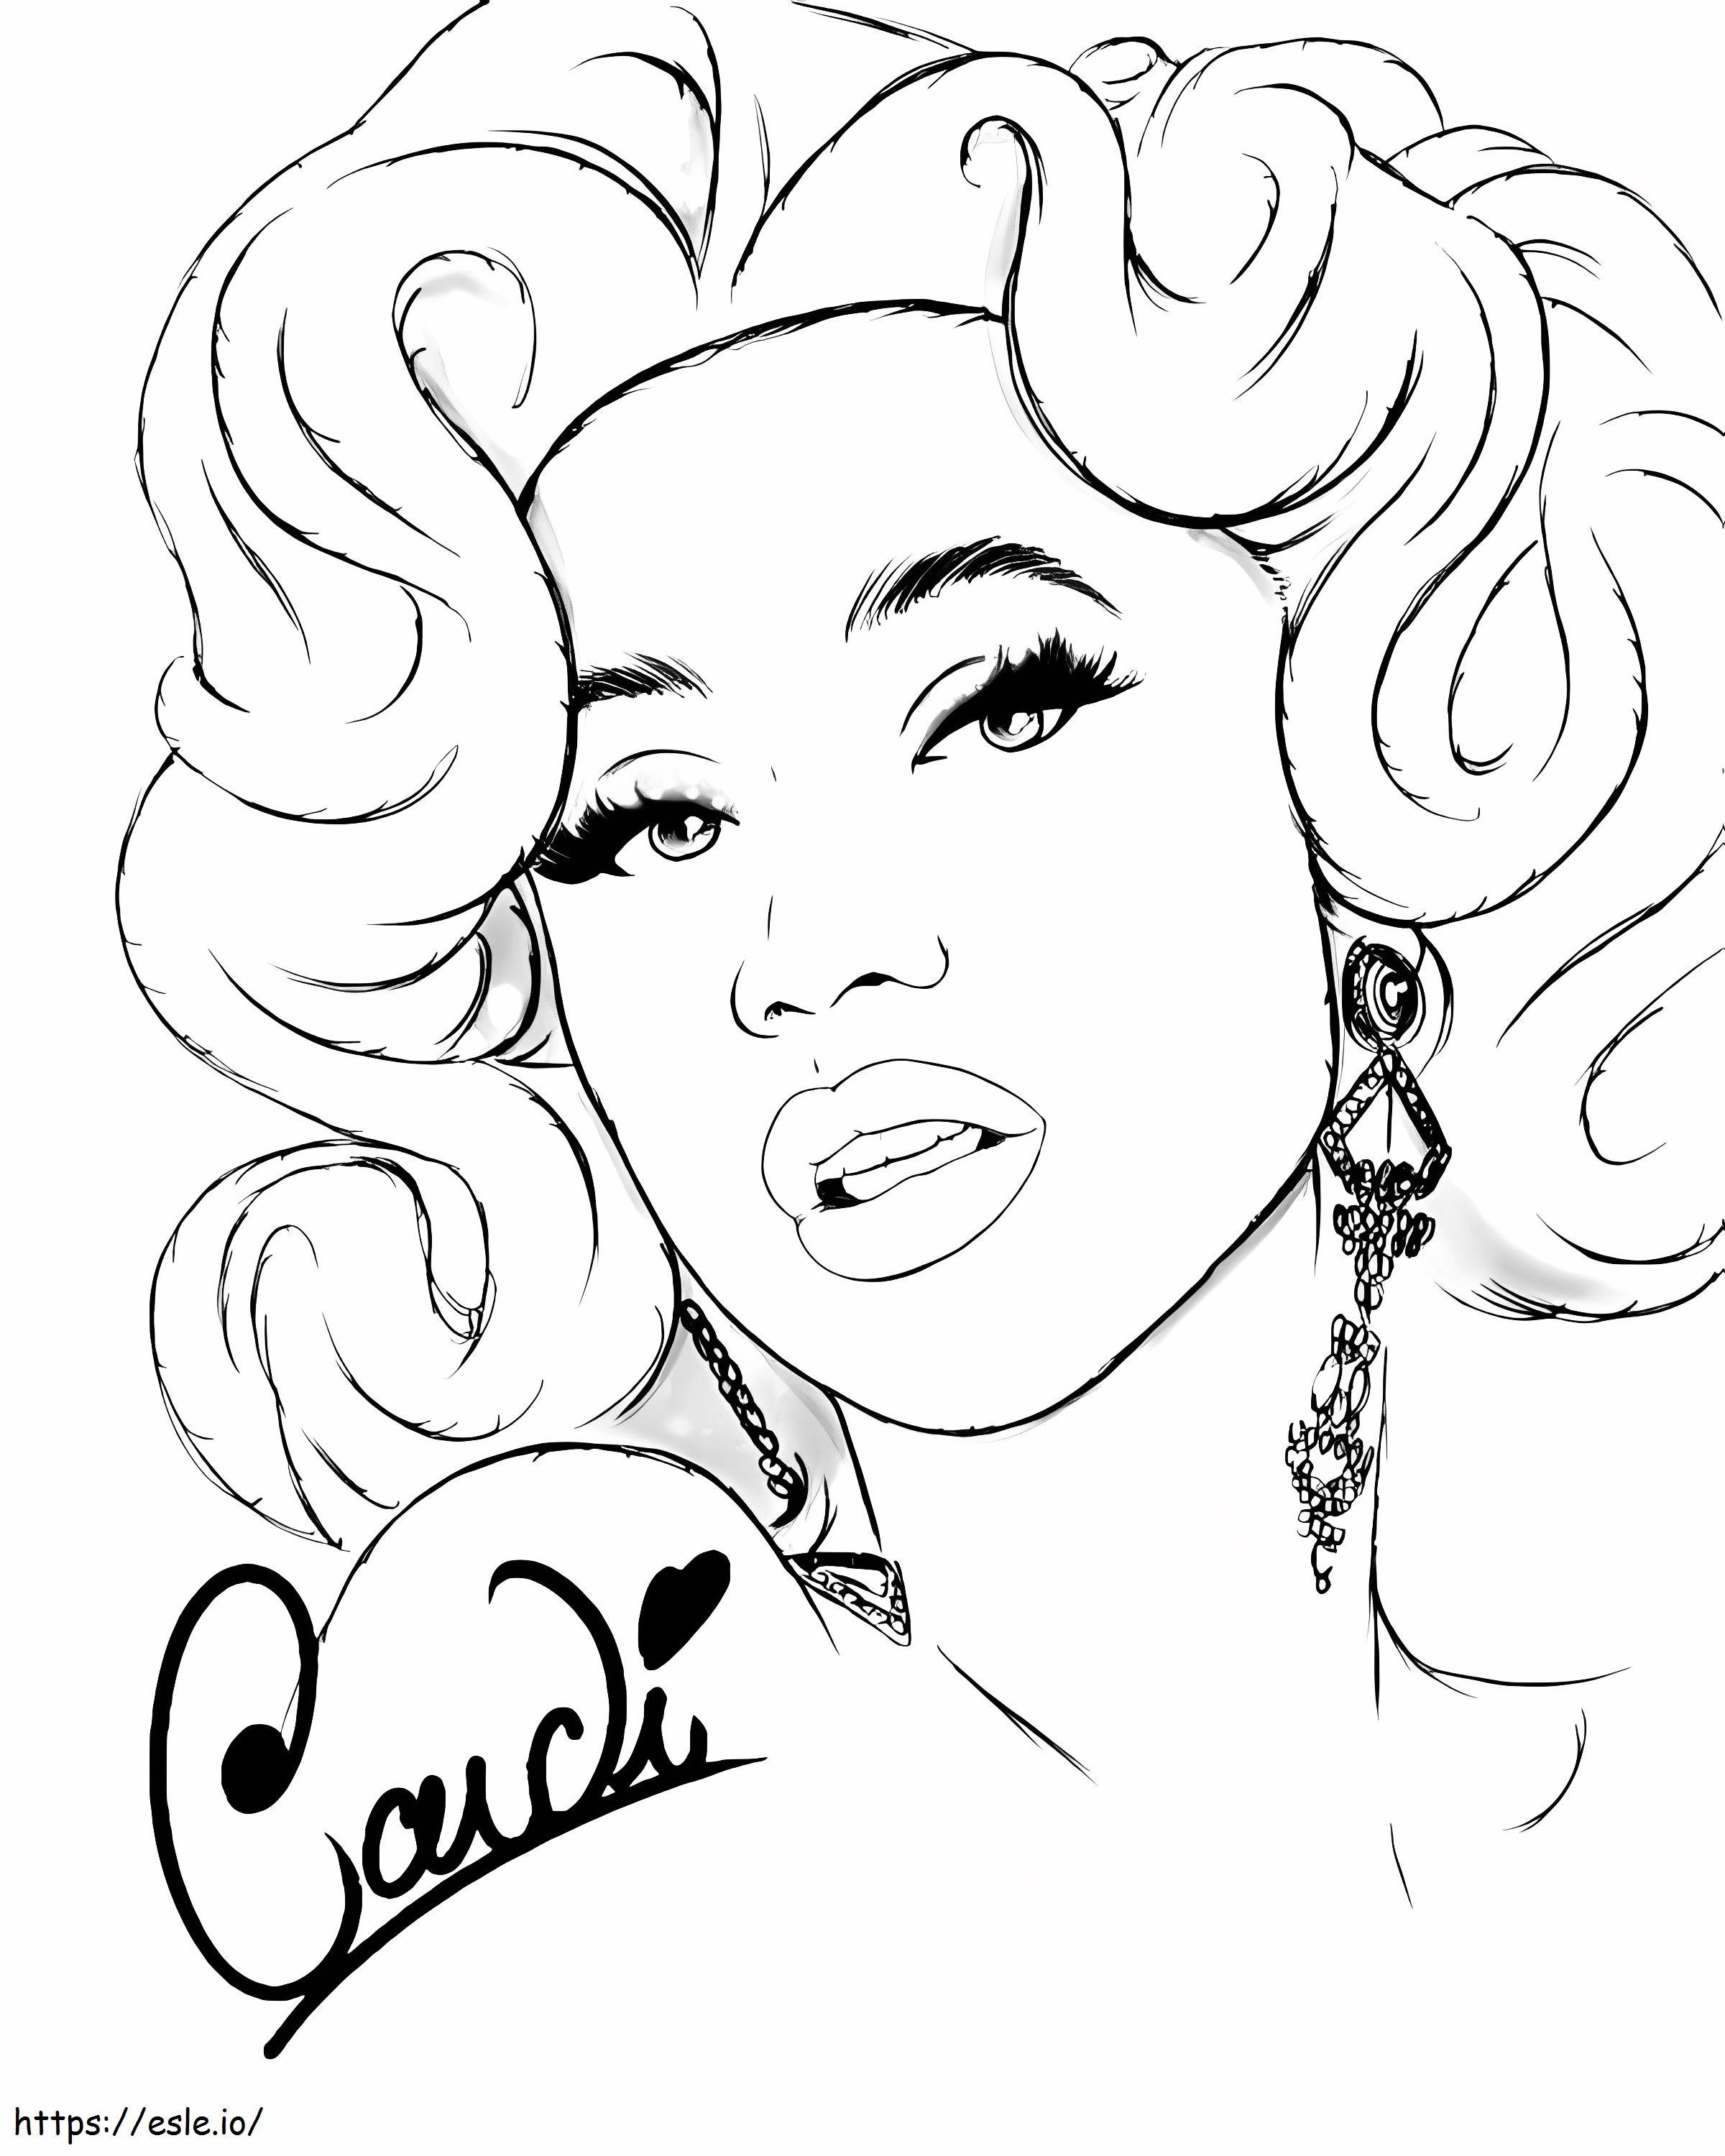 Cardi B With Short Hair coloring page